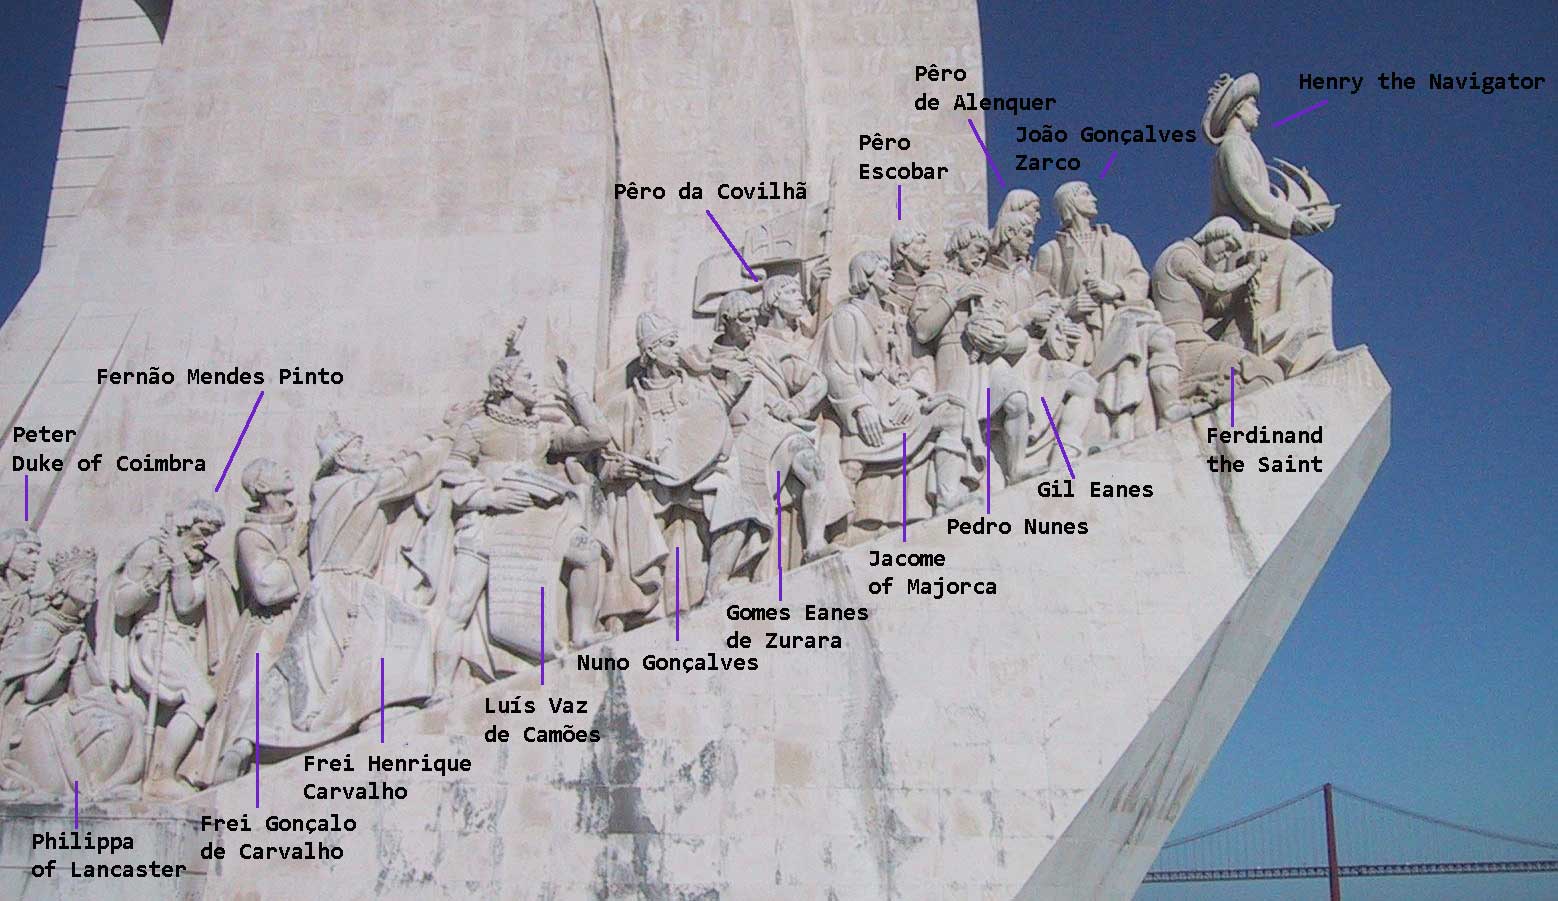 Western Profile Of Padrao dos Descobrimentos With Figures Labeled